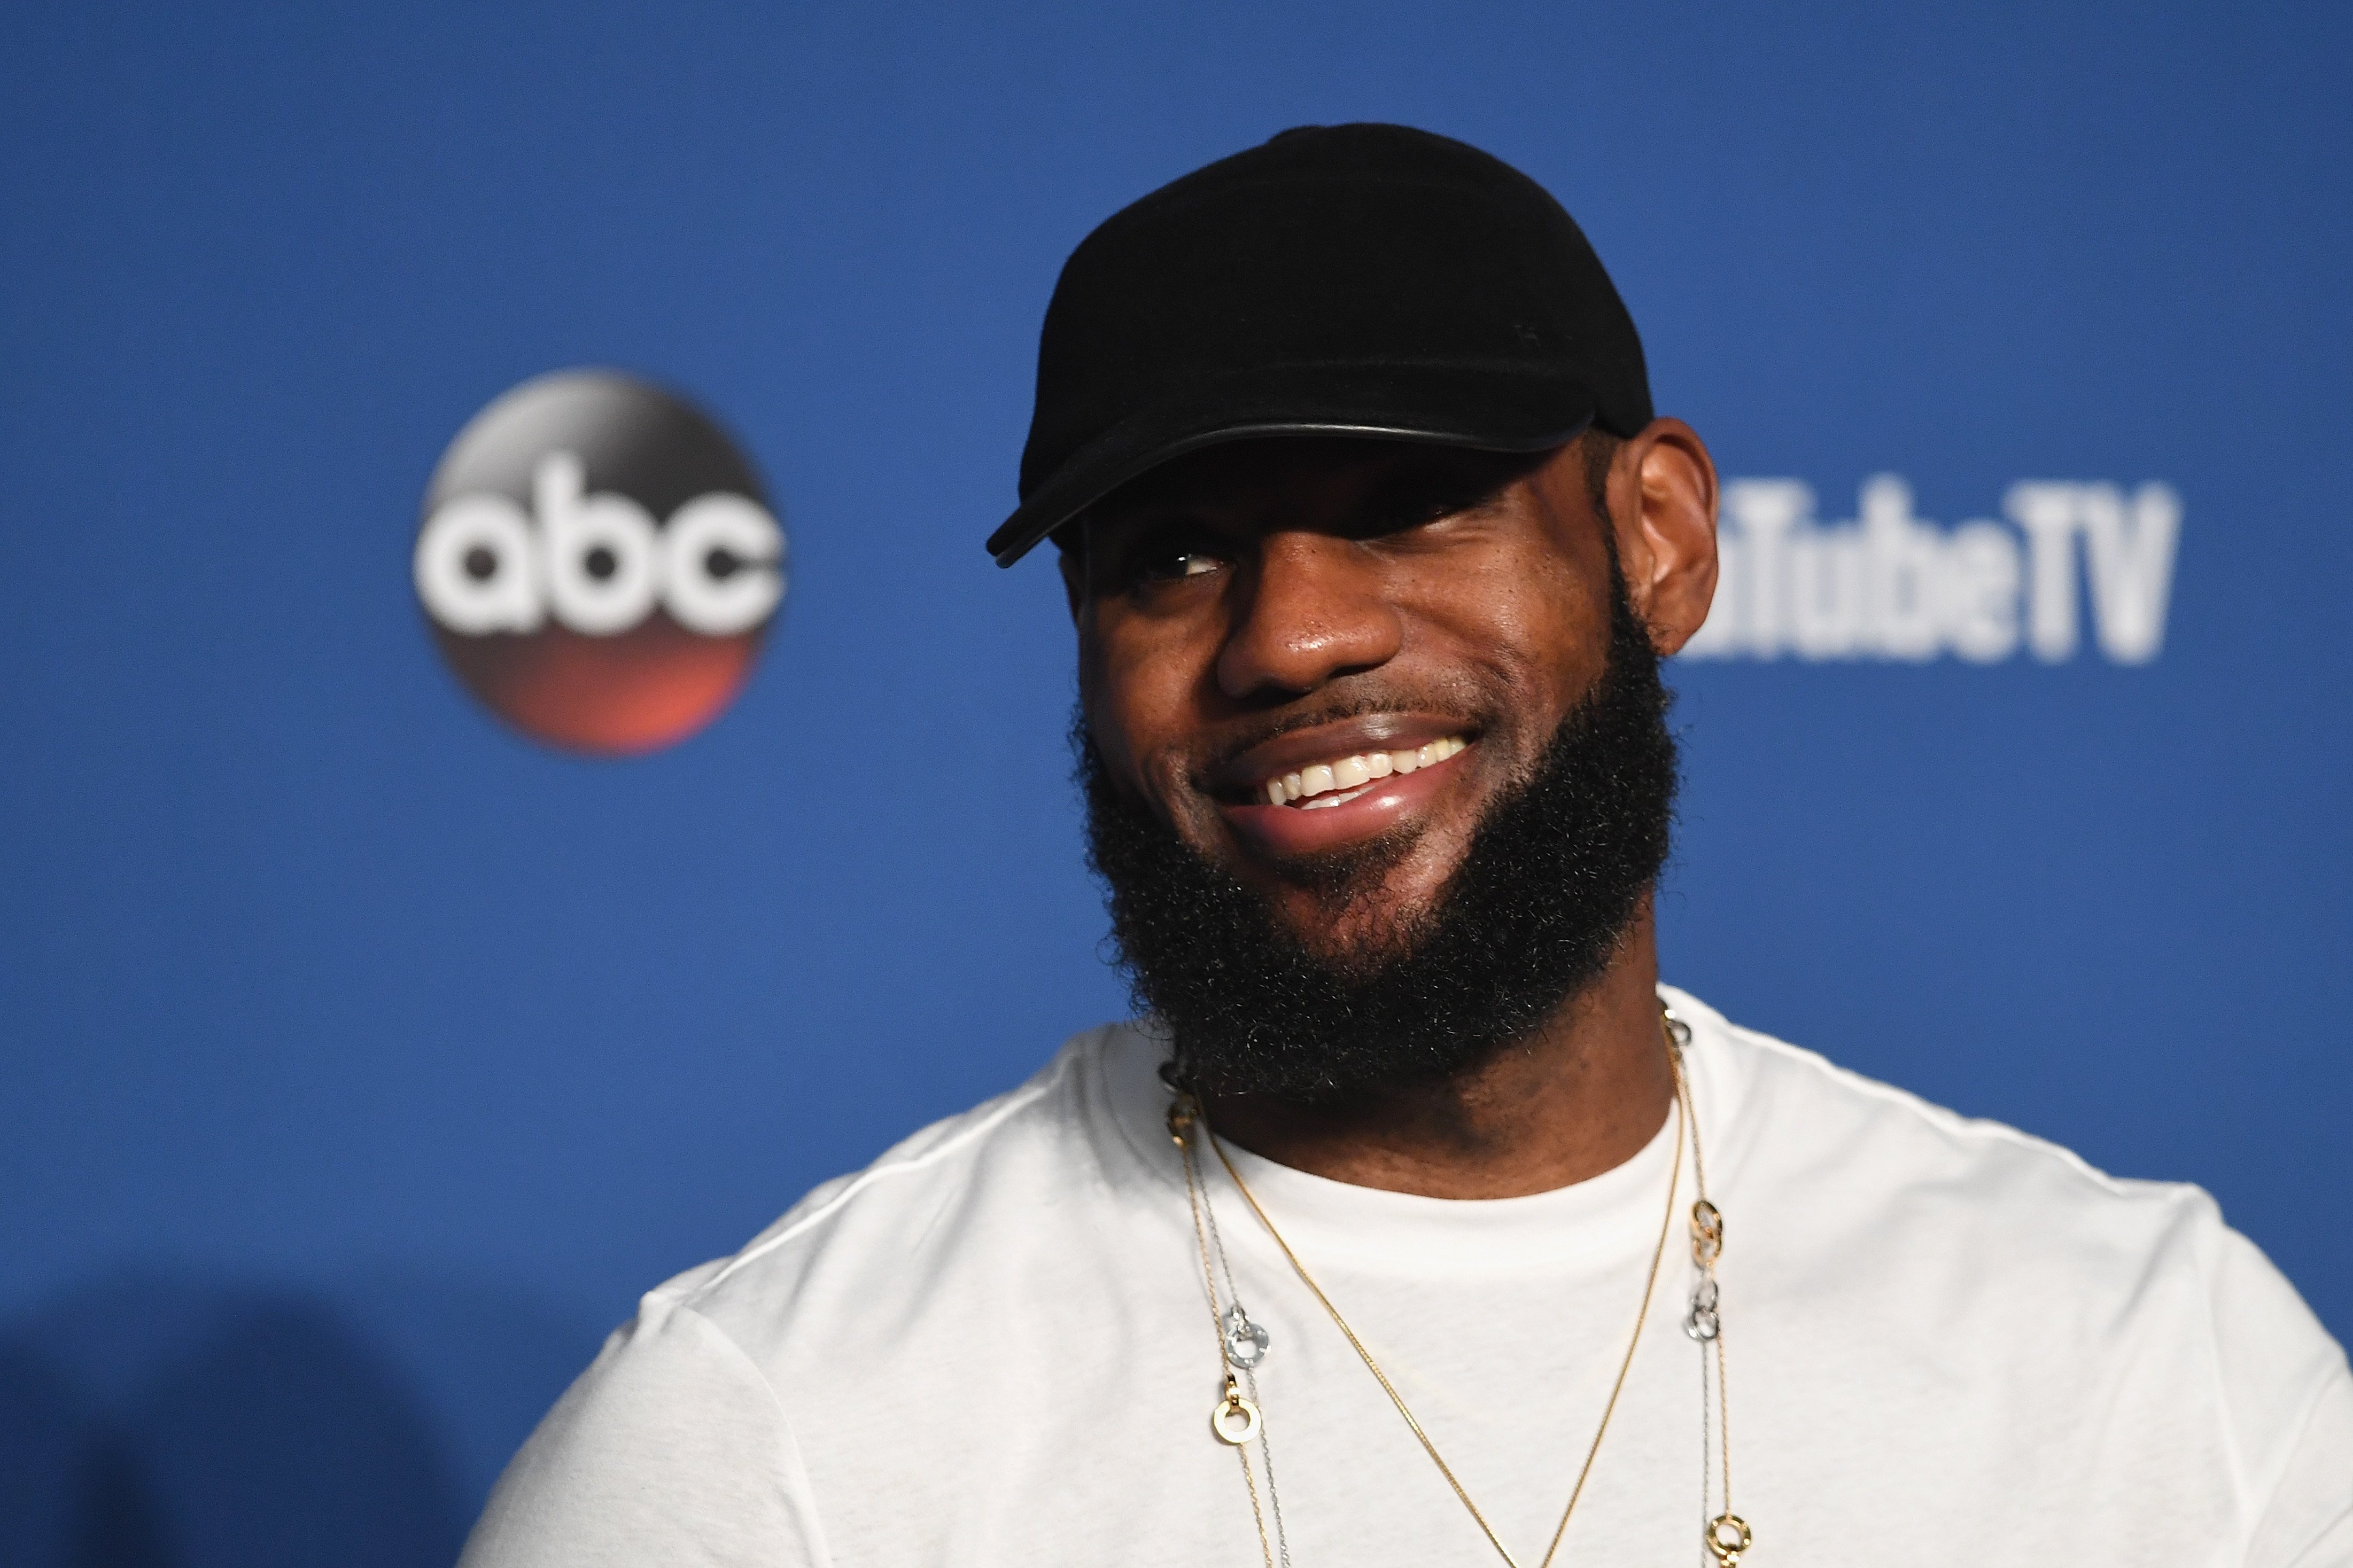 LeBron James after the fourth game in the 2018 NBA Finals in Cleveland, Ohio | Source: Getty Images